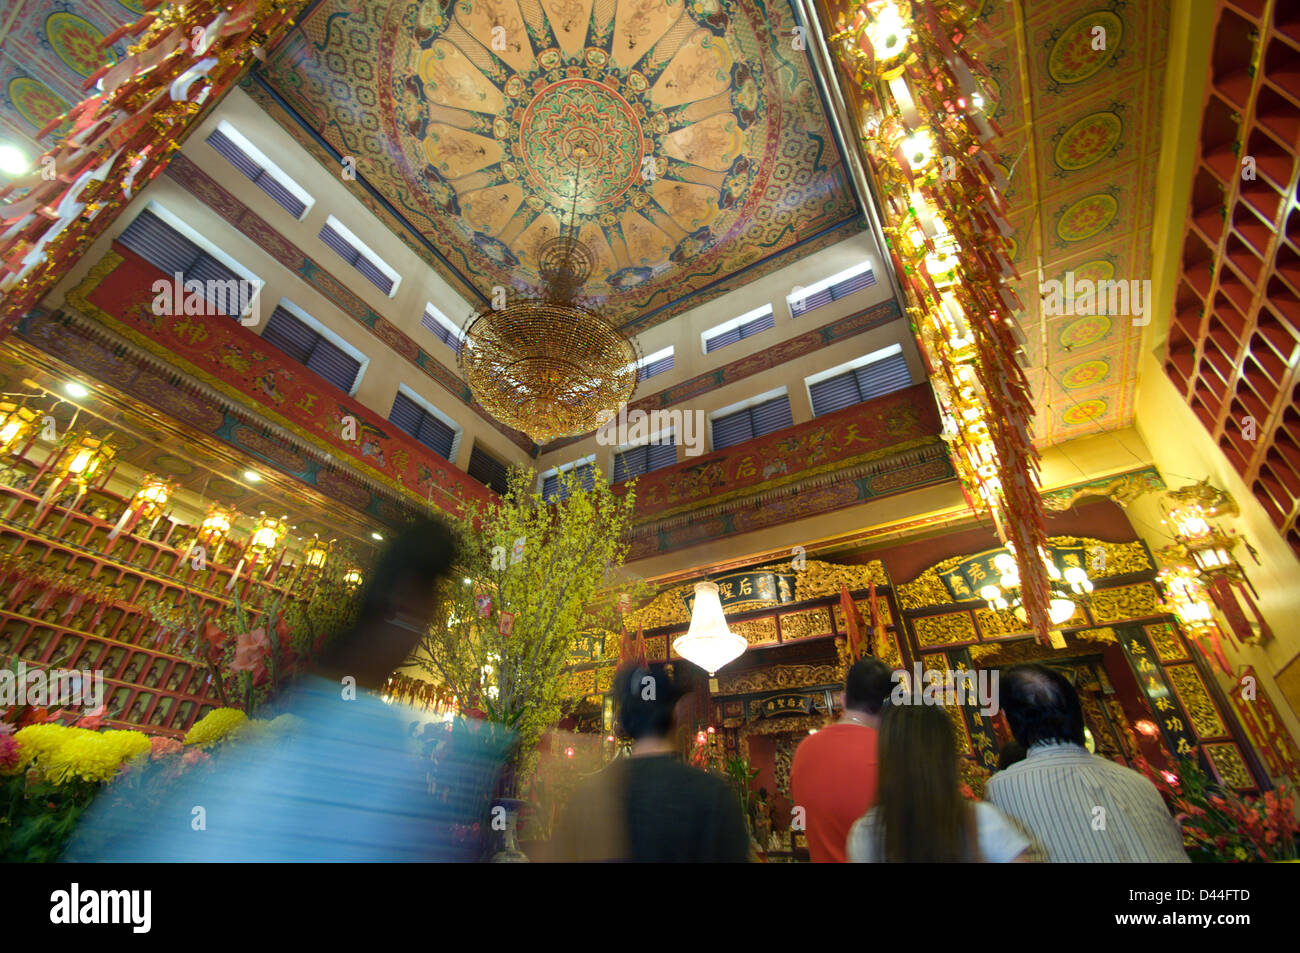 Family tours Thien Hau Temple in Los Angeles California during Year of the Snake celebrations Stock Photo